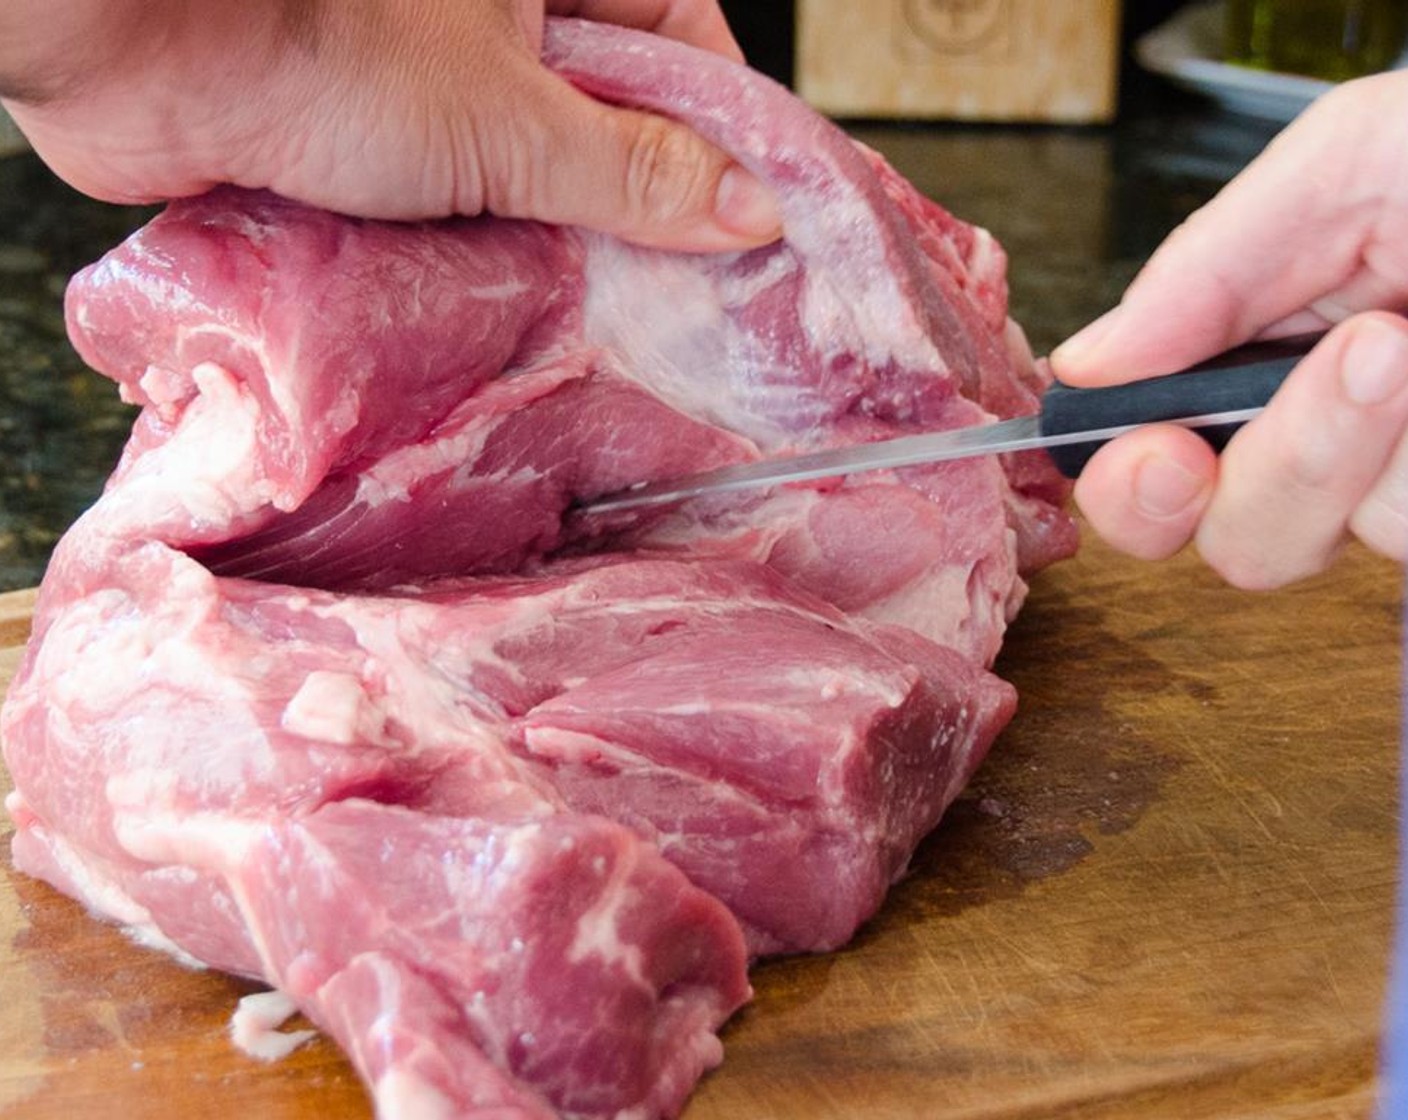 step 1 The night before, butterfly the Boneless Pork Shoulder (6 lb) by cutting the meat open so that it lays in a flat even thickness. Cut through the thick part of the meat, horizontally to almost the edge. Unfold it for a broad flap of meat, about 1 1/2-2 inches thick.